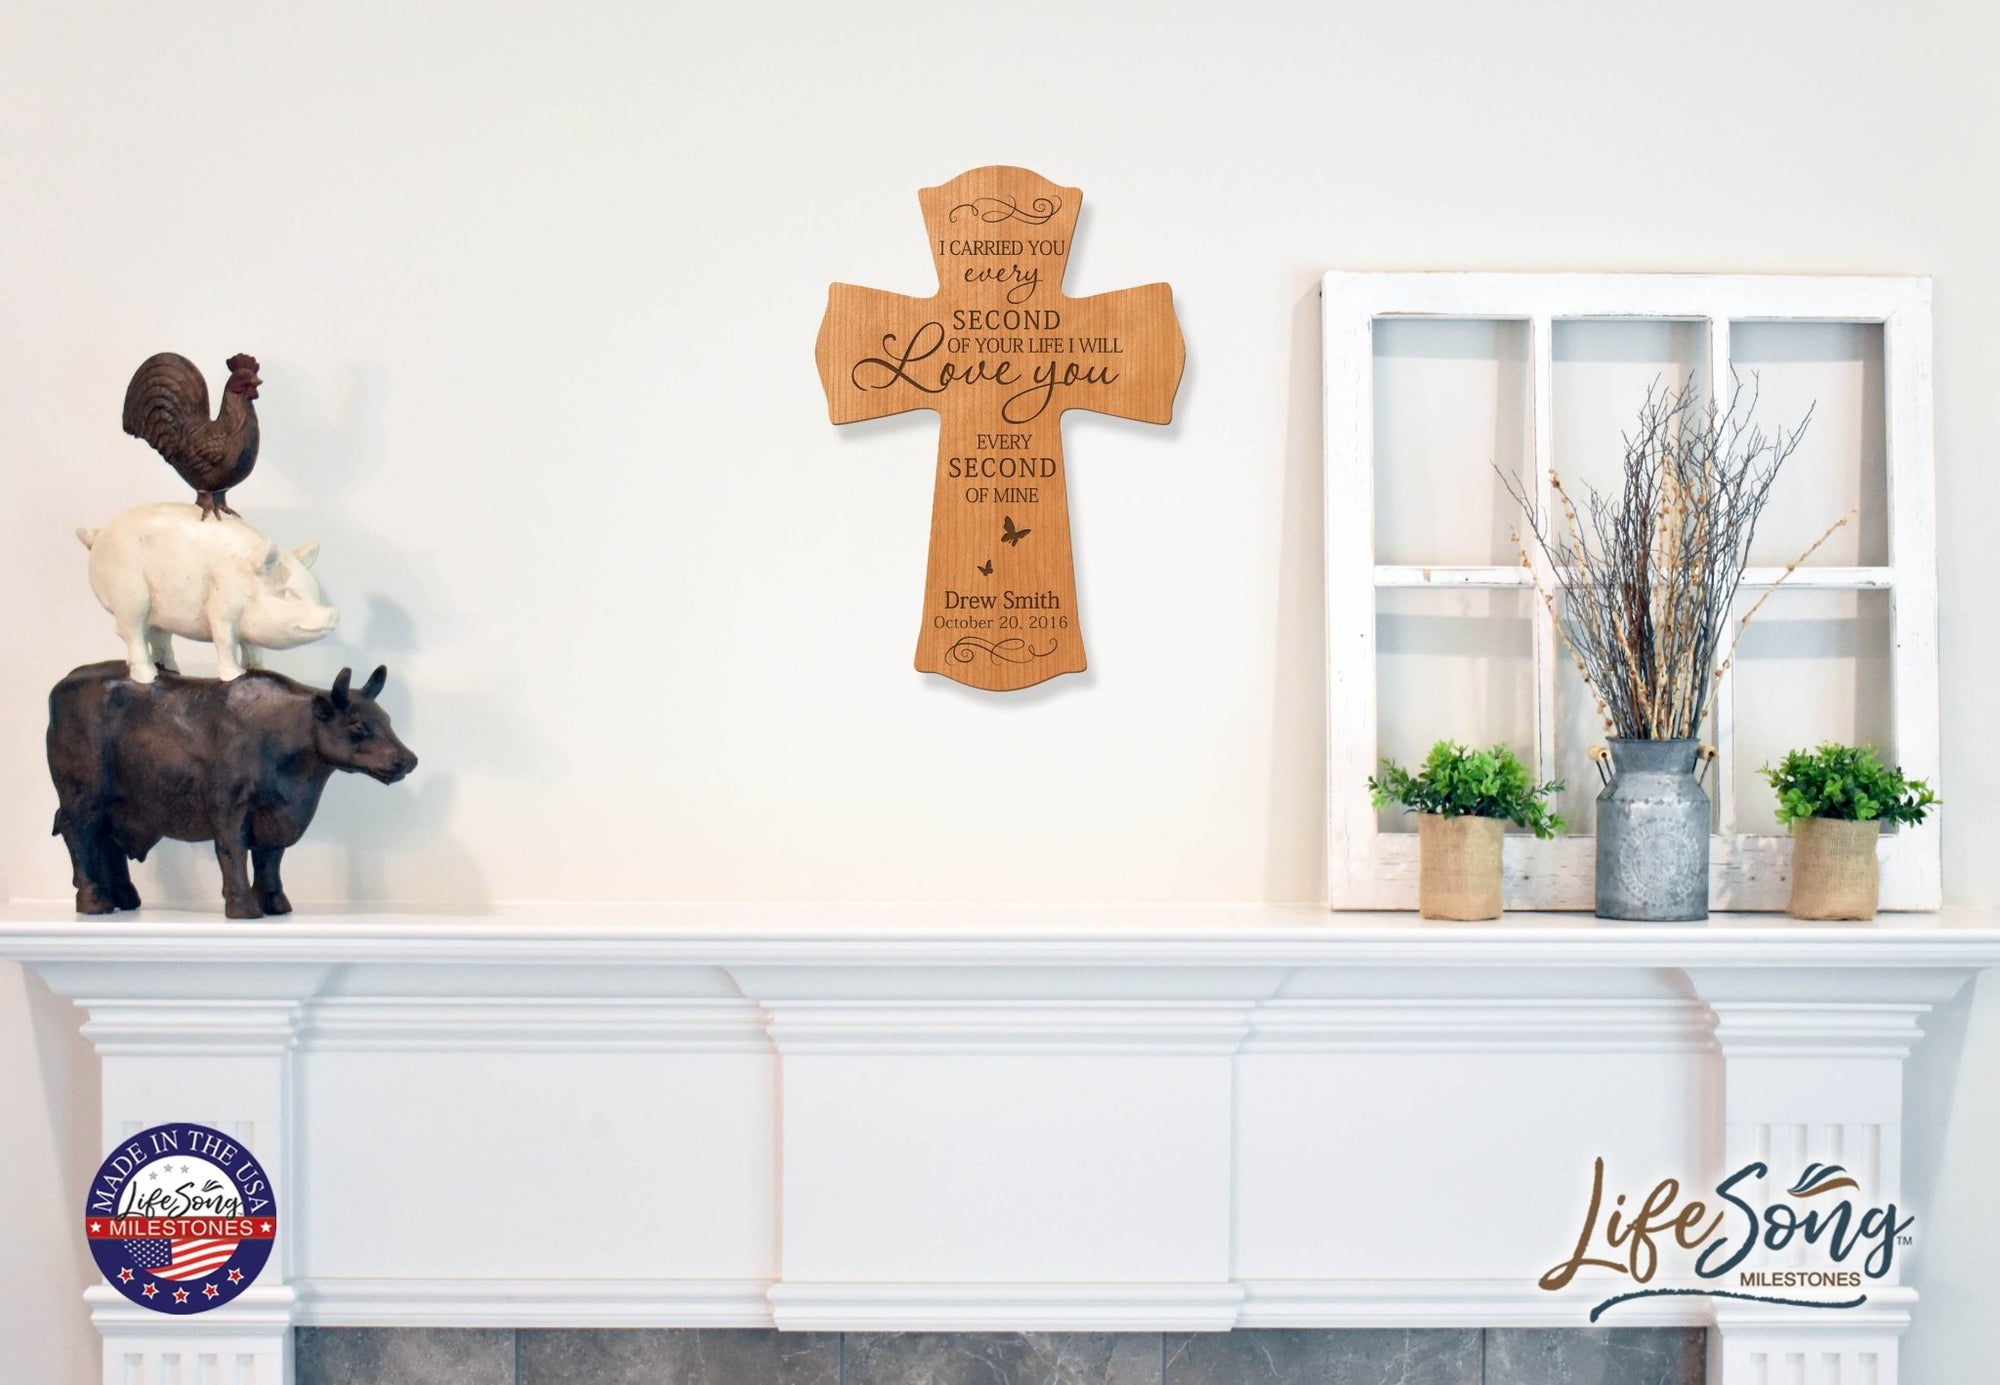 Custom Memorial Wooden Cross 8.5x11 I Carried You Butterfly - LifeSong Milestones